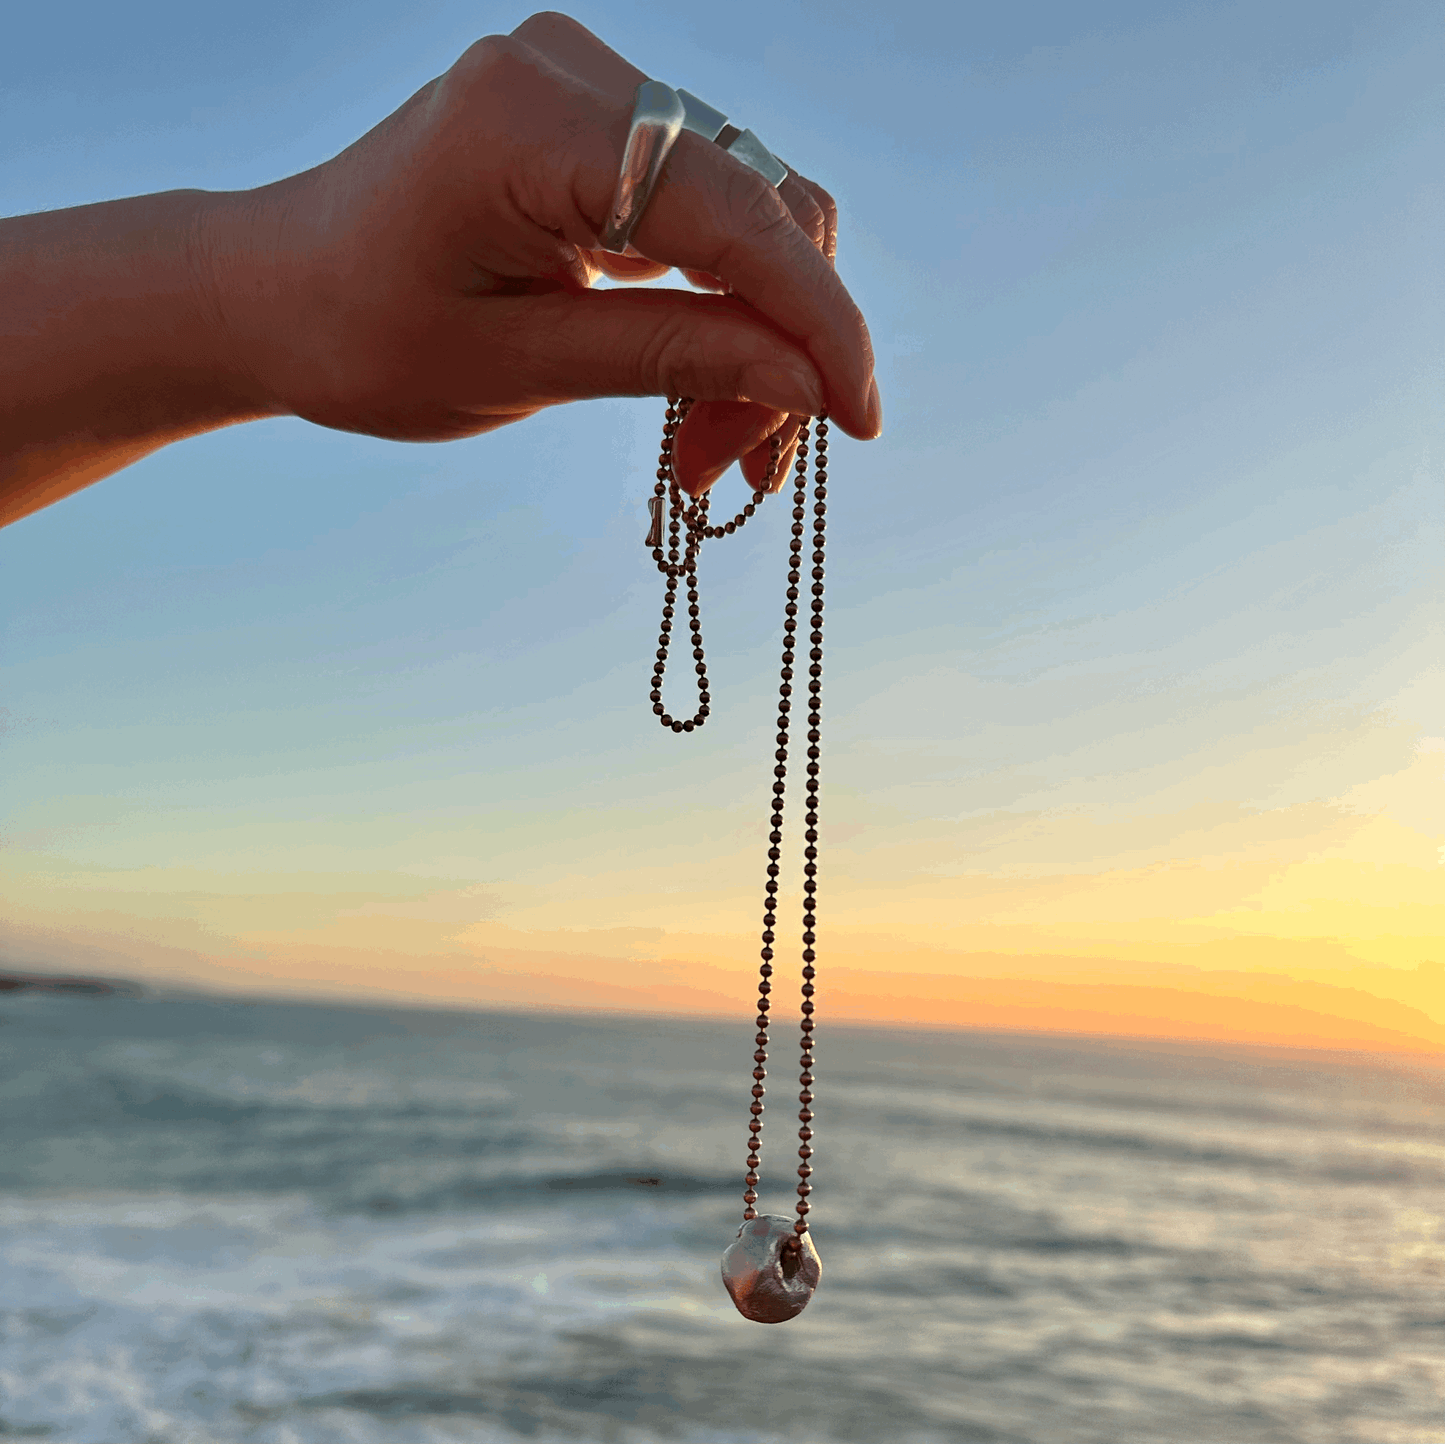 A large solid silver Hag Stone pendant held up against the backdrop of the sea.